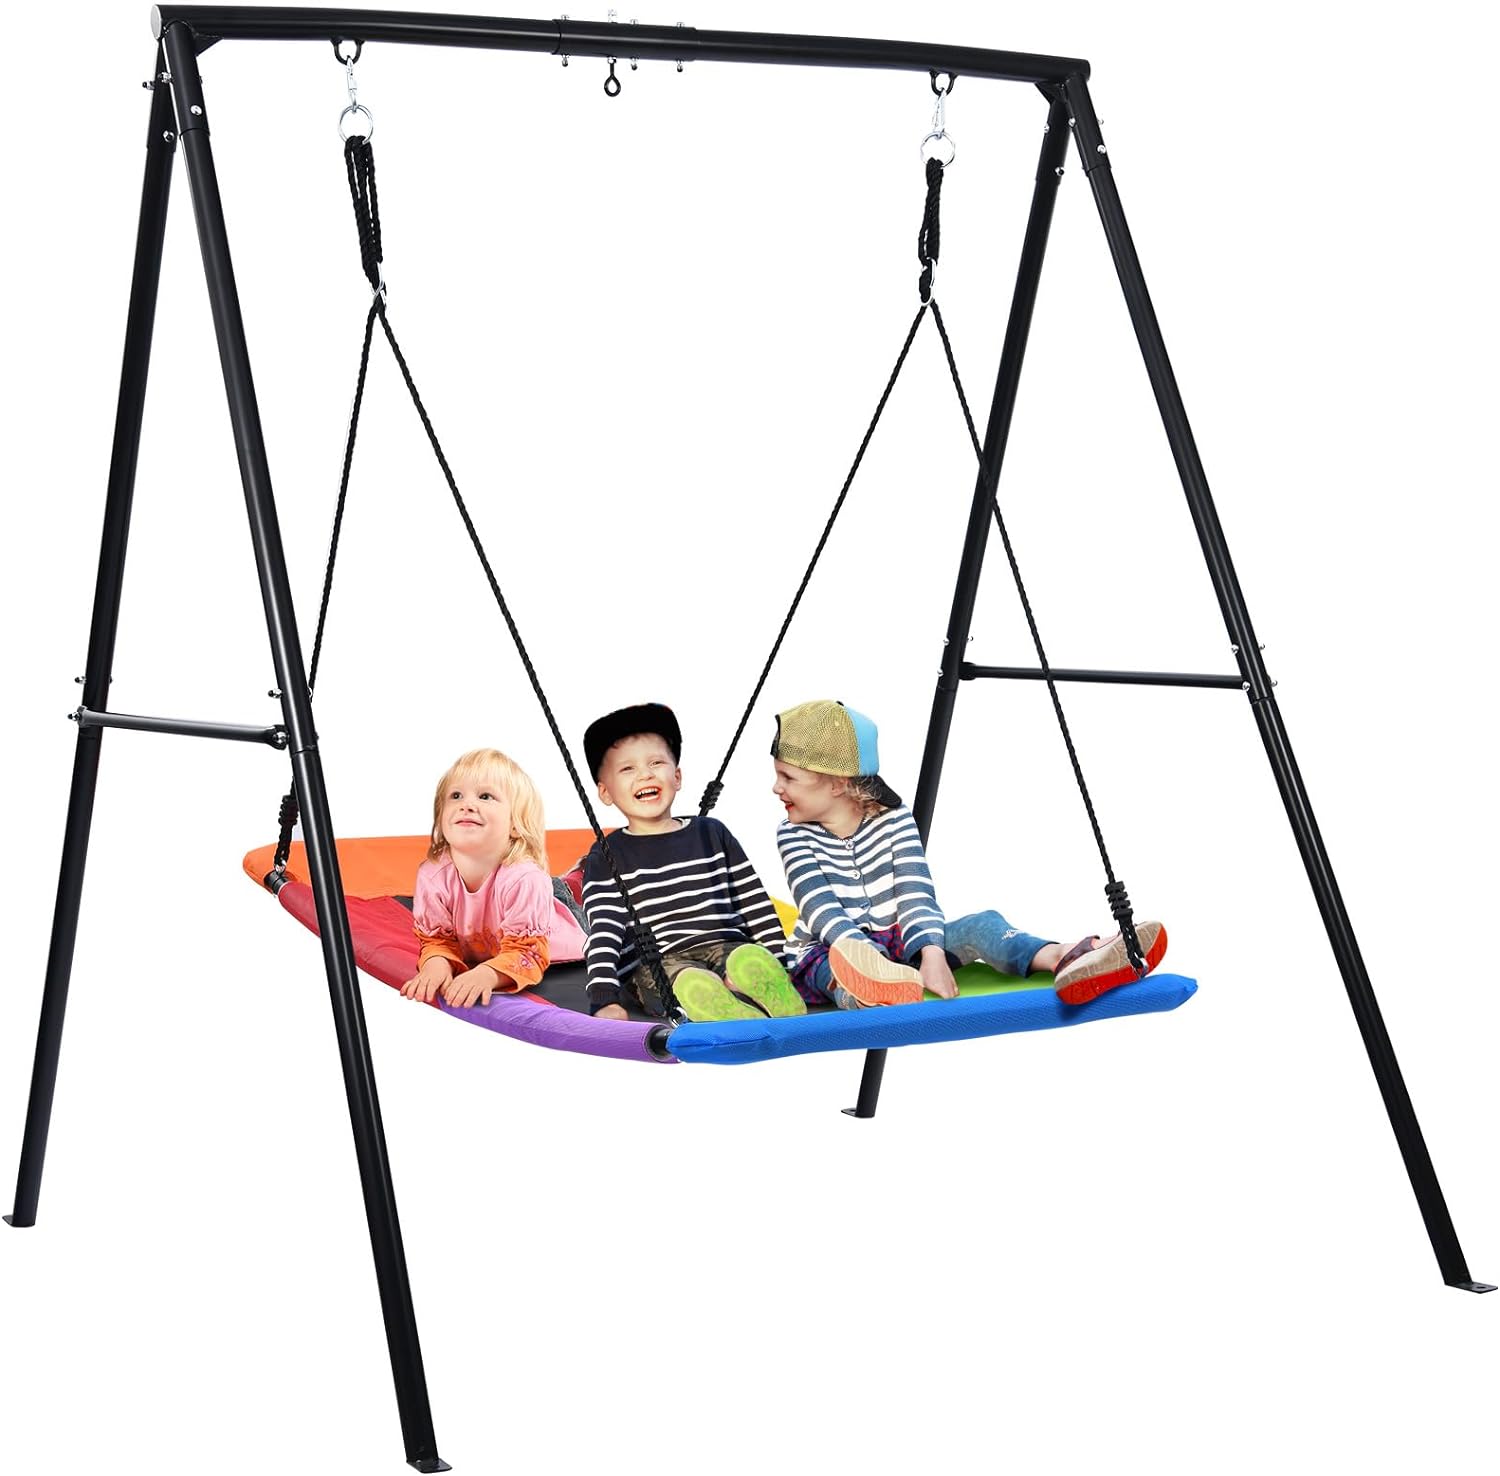 Trekassy 440lbs Extra Large Metal Heavy Duty A-Frame Swing Stand